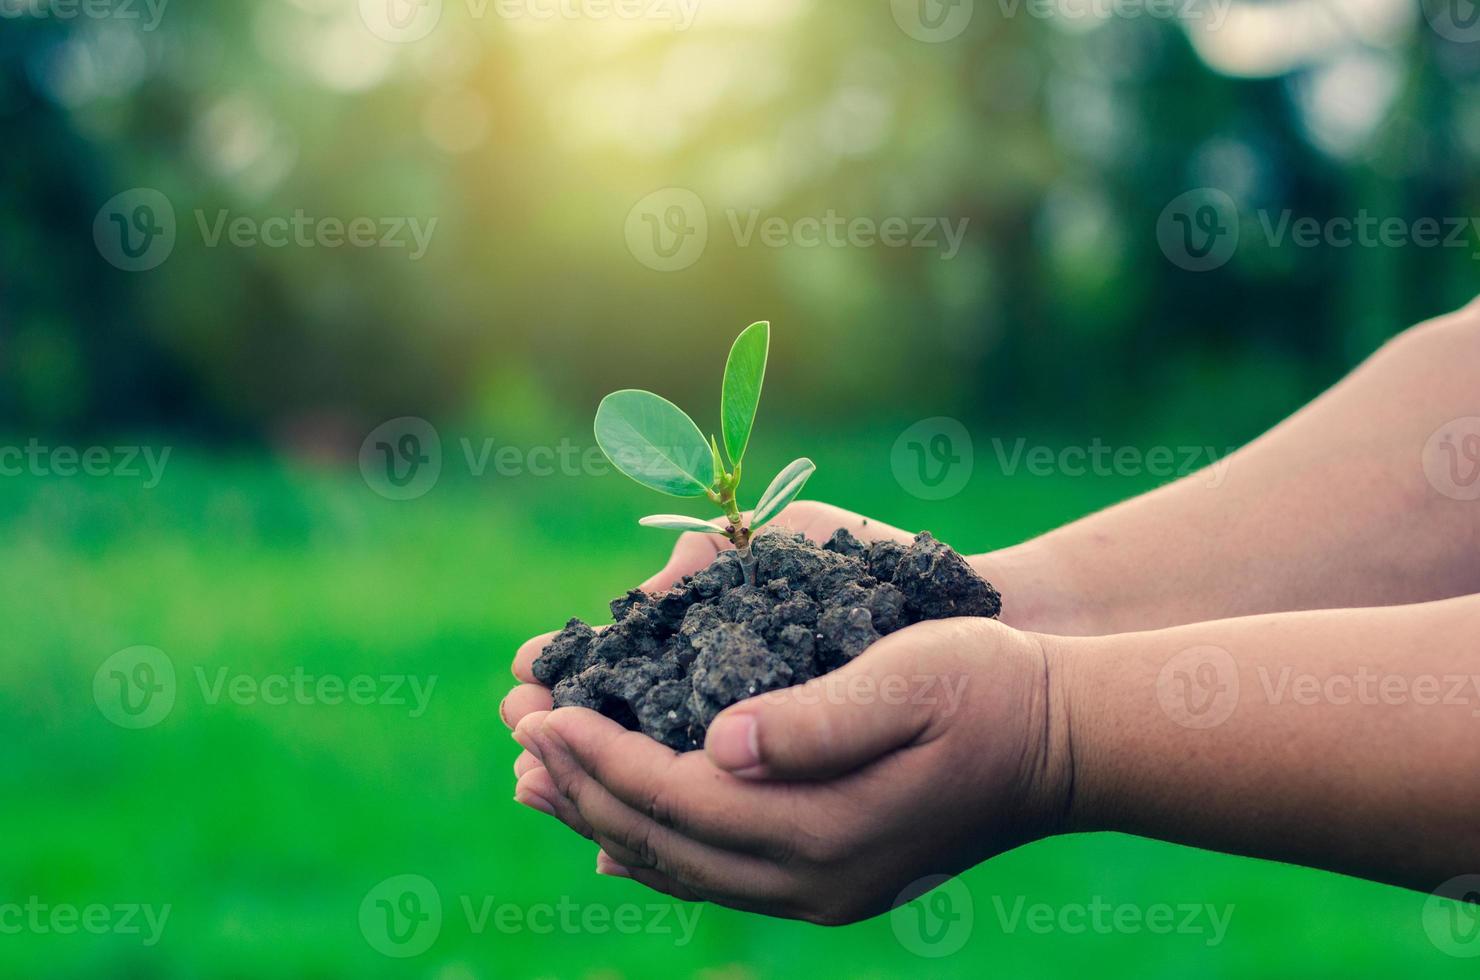 In the hands of trees growing seedlings. Bokeh green Background Female hand holding tree on nature field grass Forest conservation concept photo